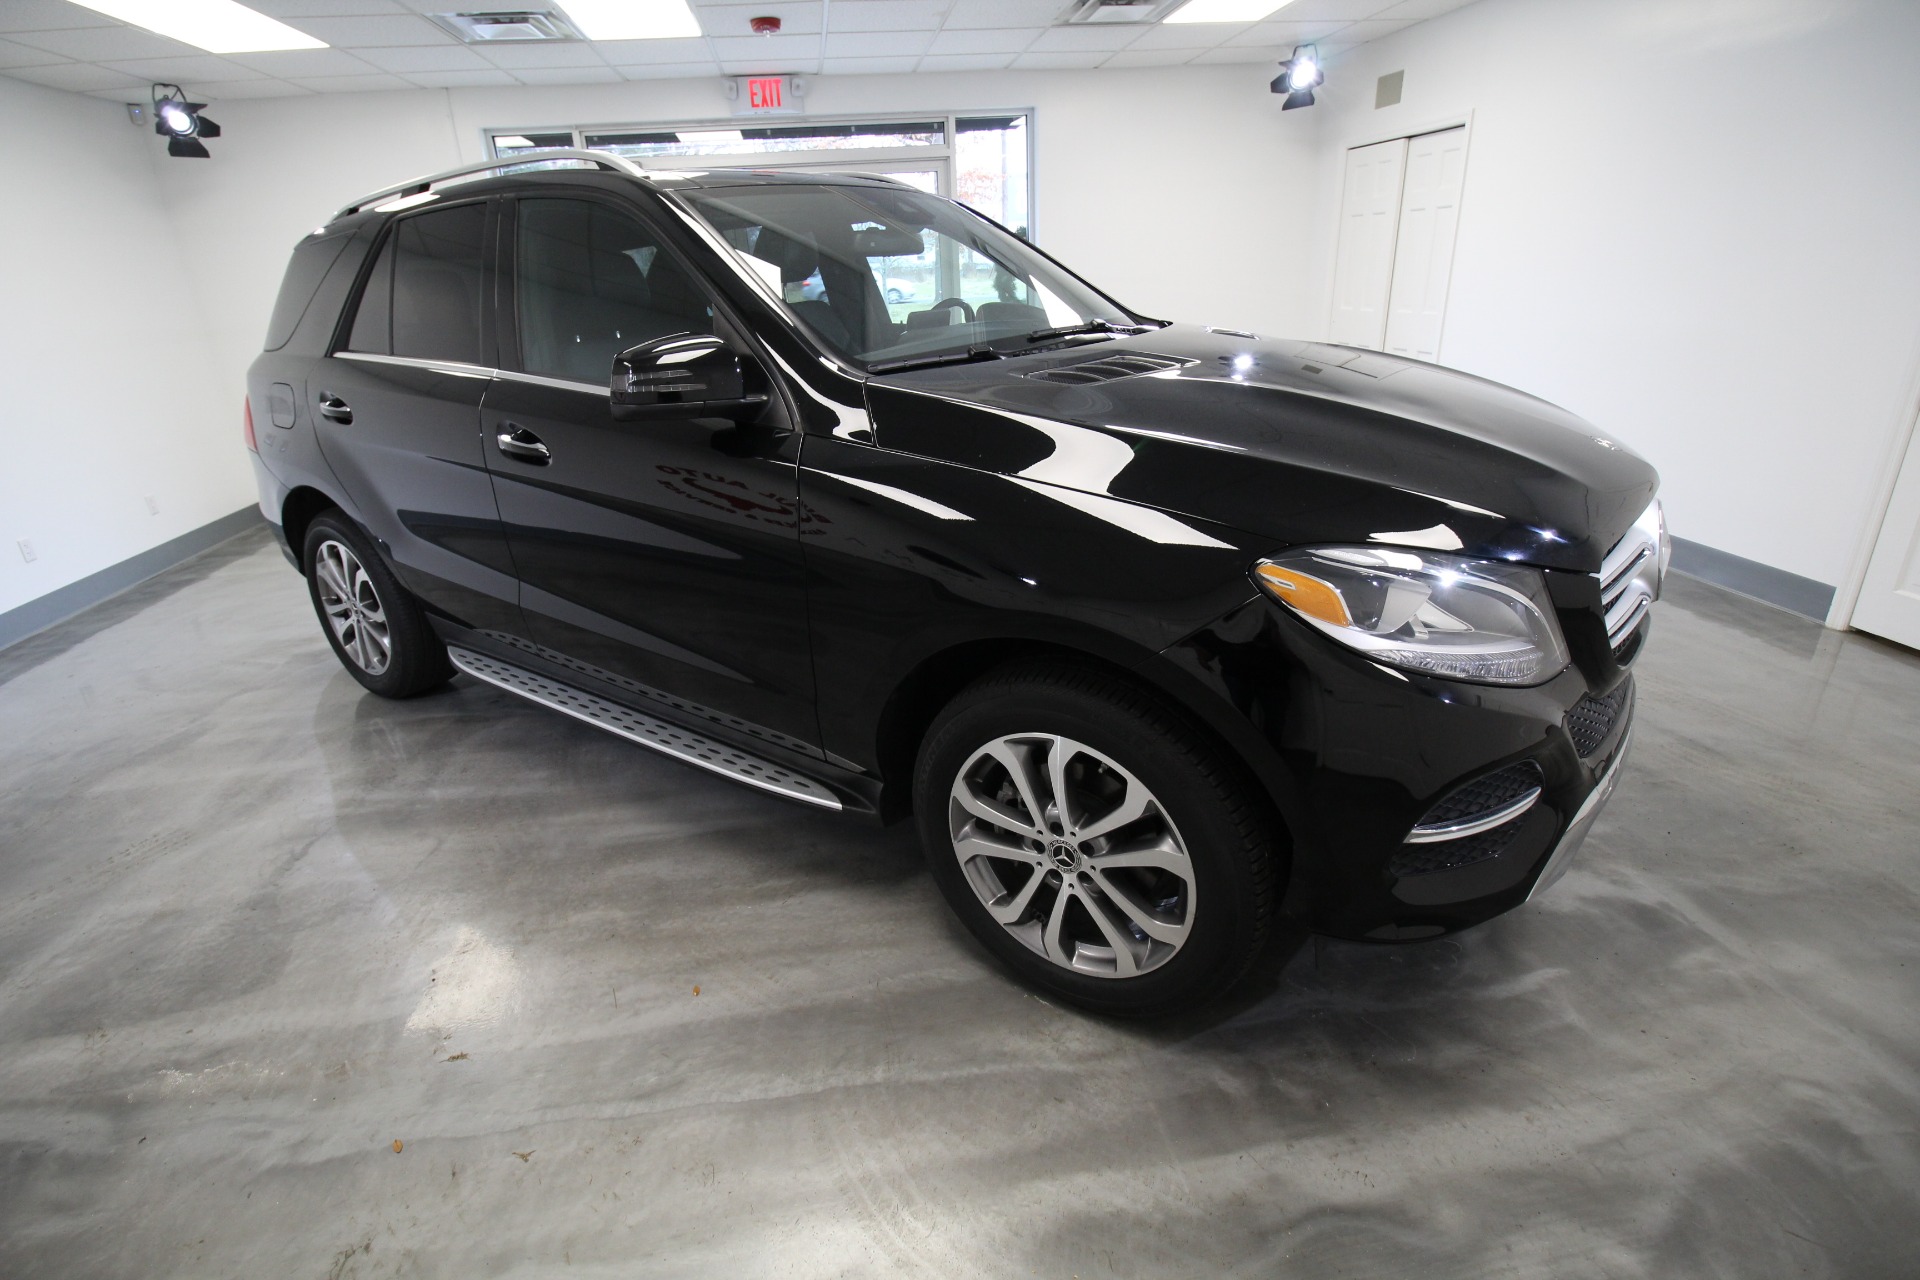 Used 2018 Black Mercedes-Benz GLE-Class GLE350 4MATIC AWD LOW MILES LOADED WITH OPTIONS | Albany, NY